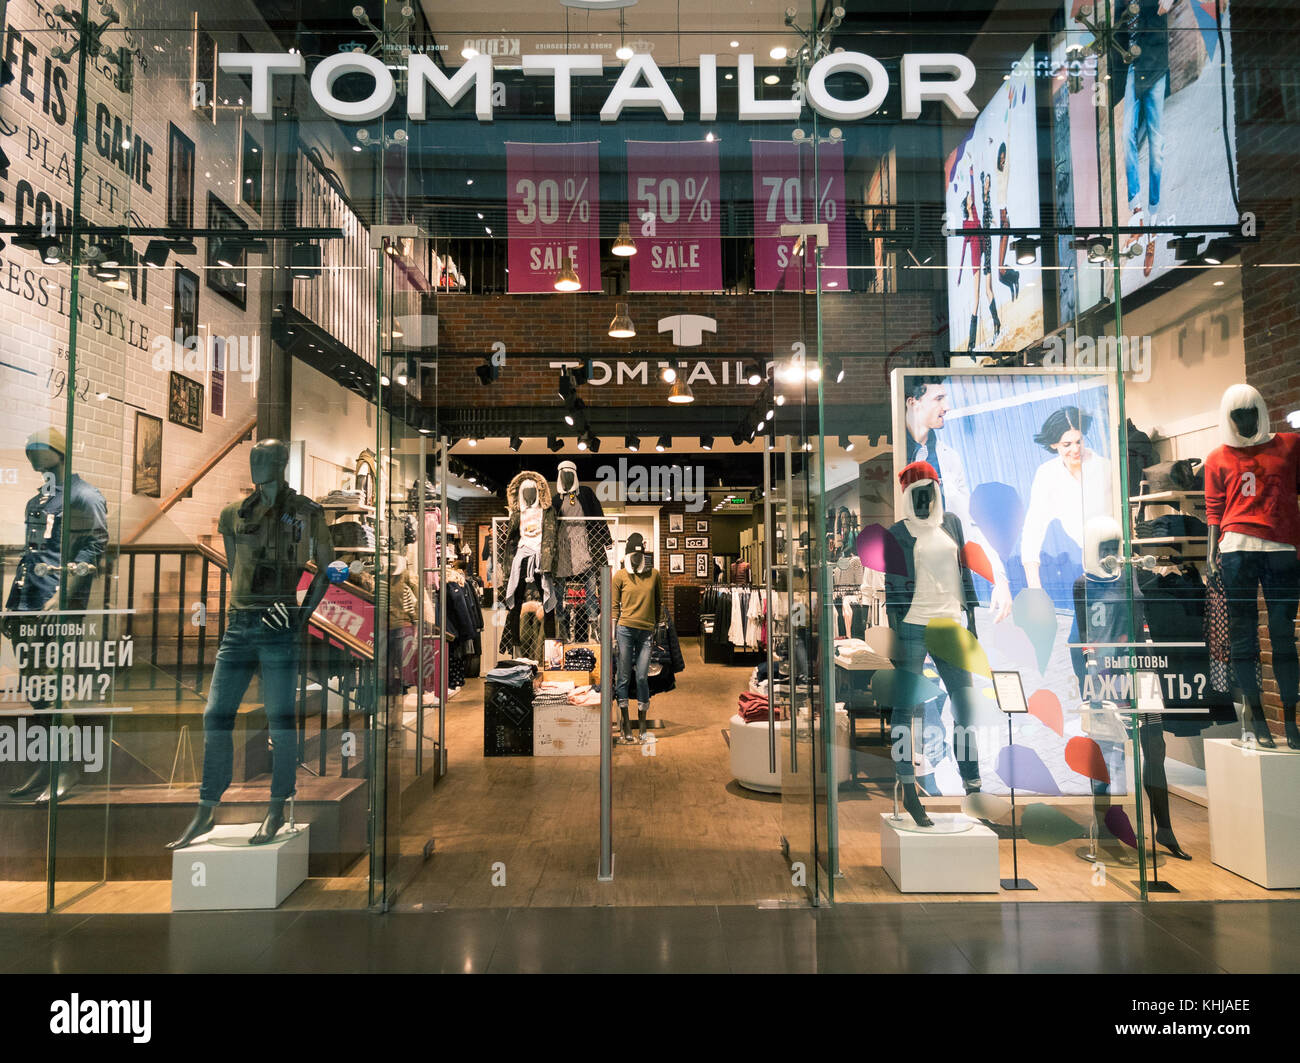 Tom Tailor clothing shop interior in the Columbus mall Stock Photo - Alamy